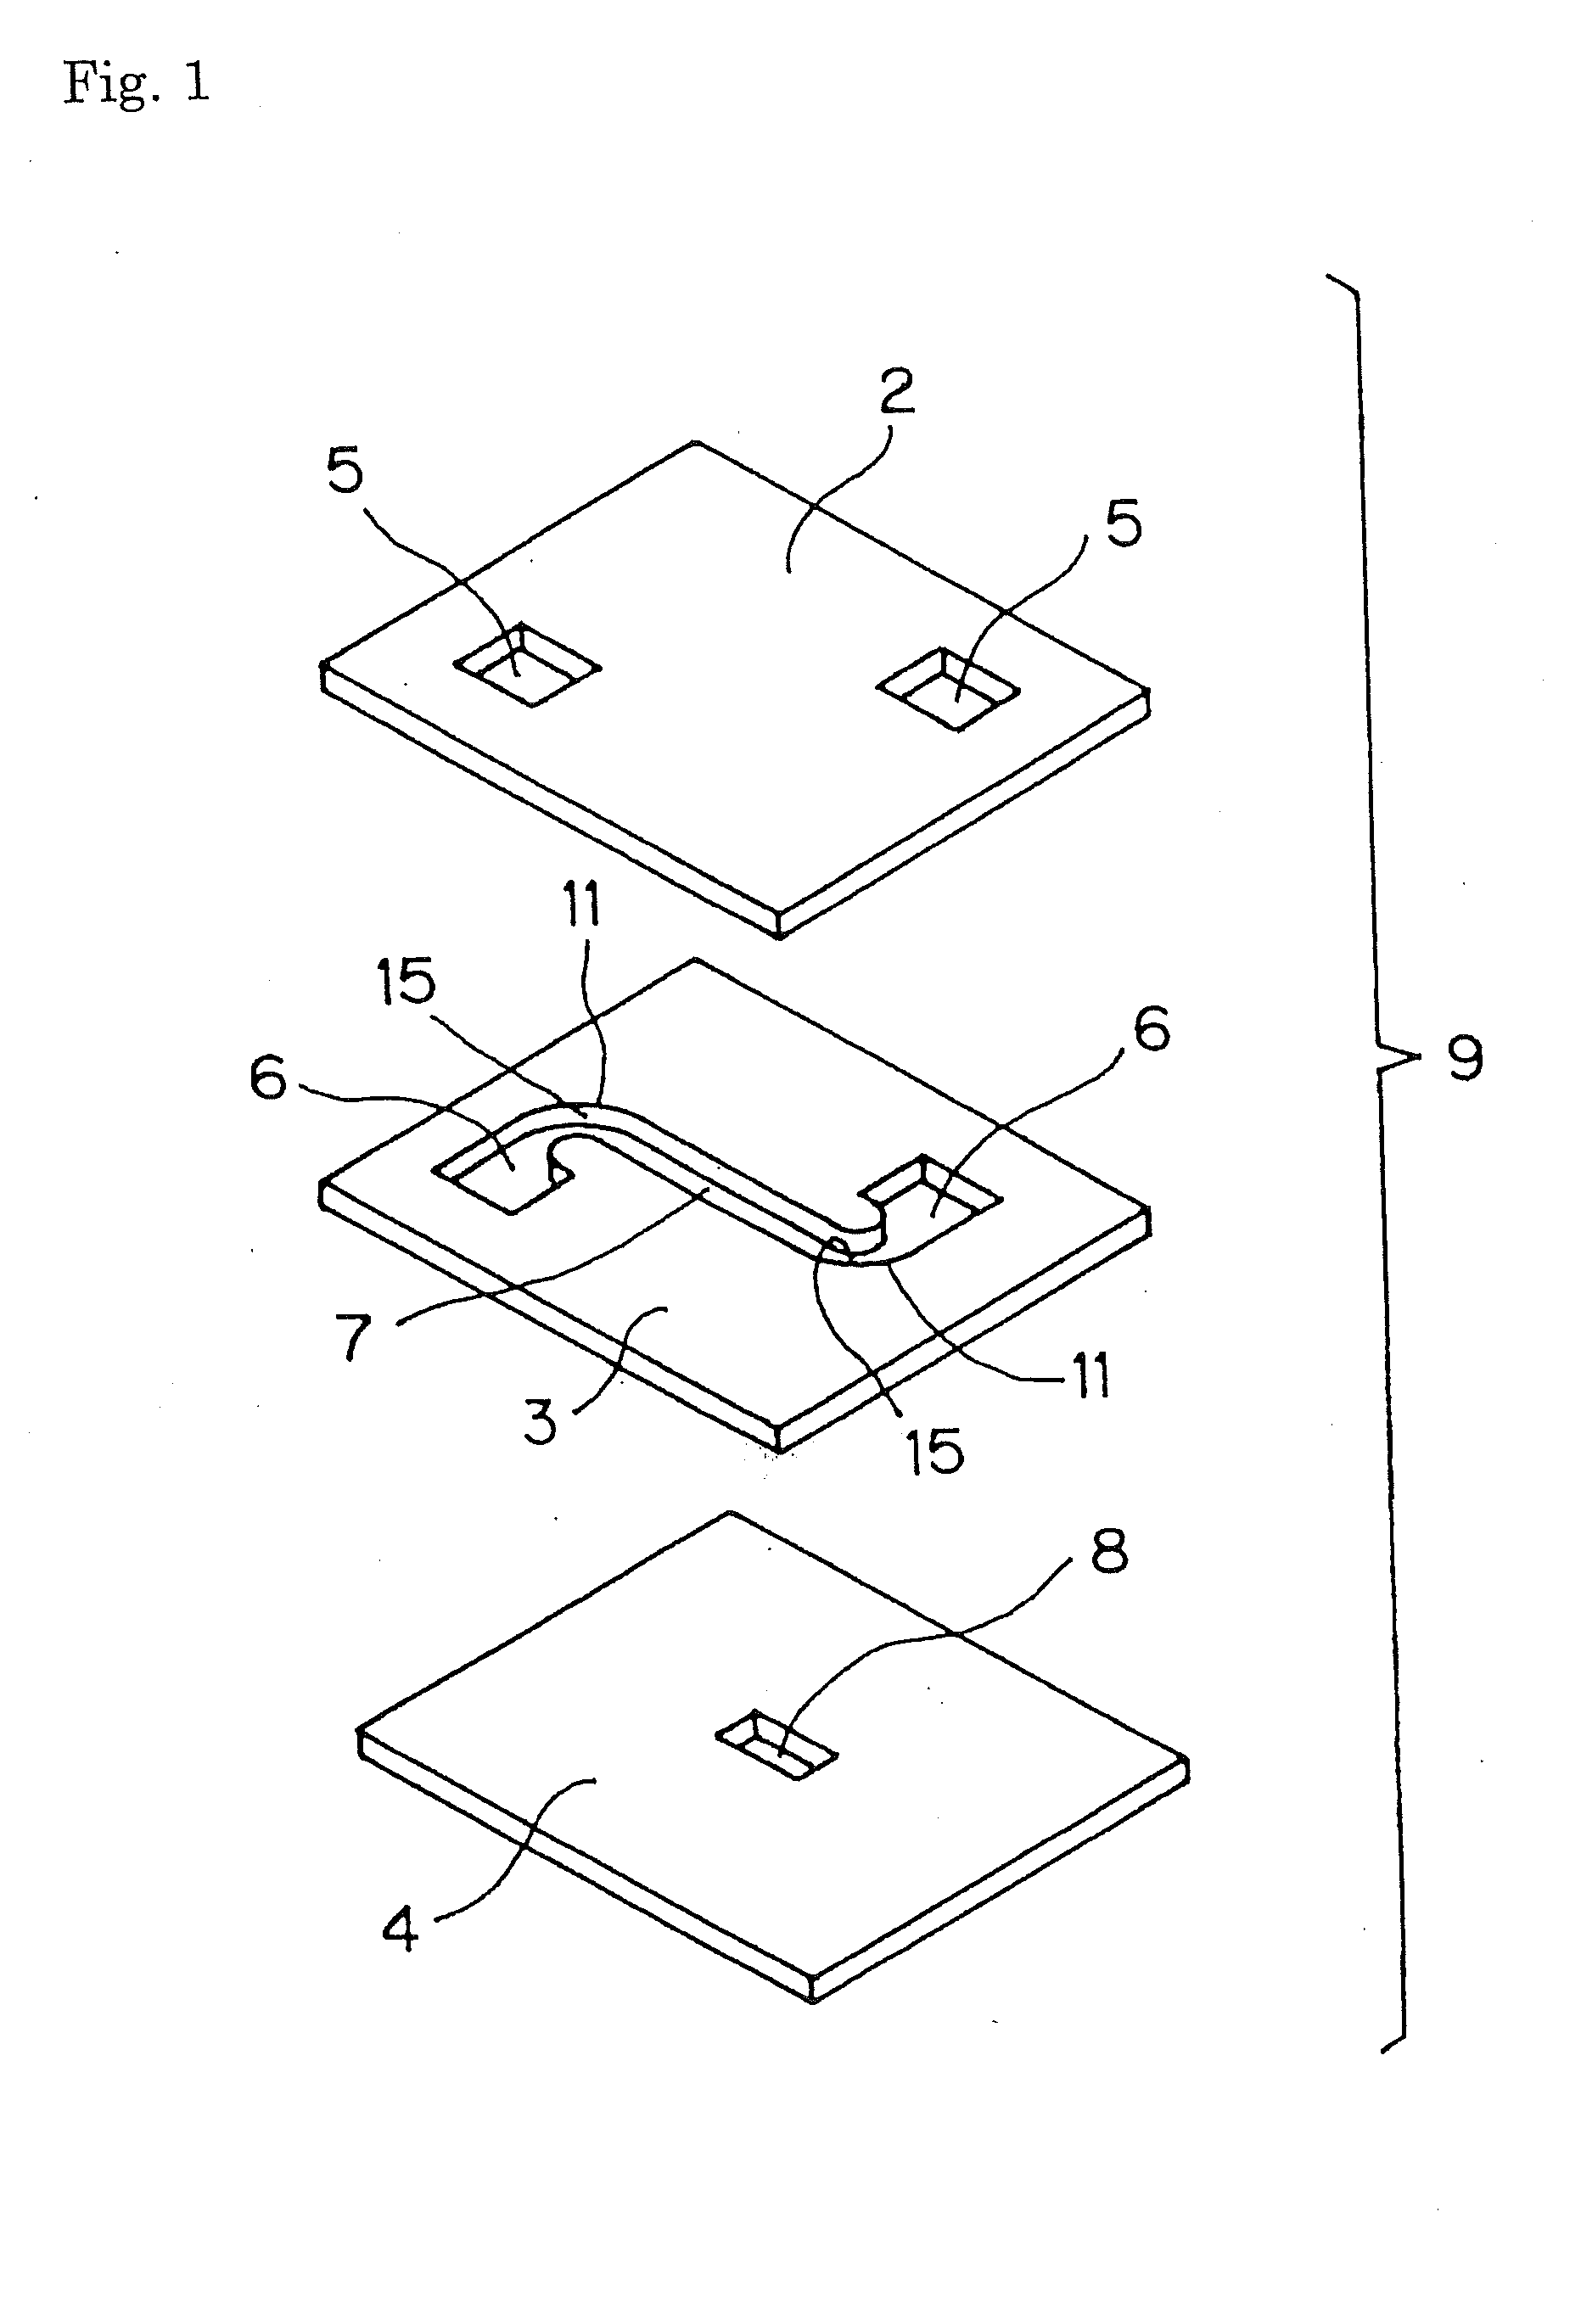 Sheet for Shielding Soft X-Rays in a Remover Using Soft X-Rays that Removes Static Charges and a Method of Manufacturing It